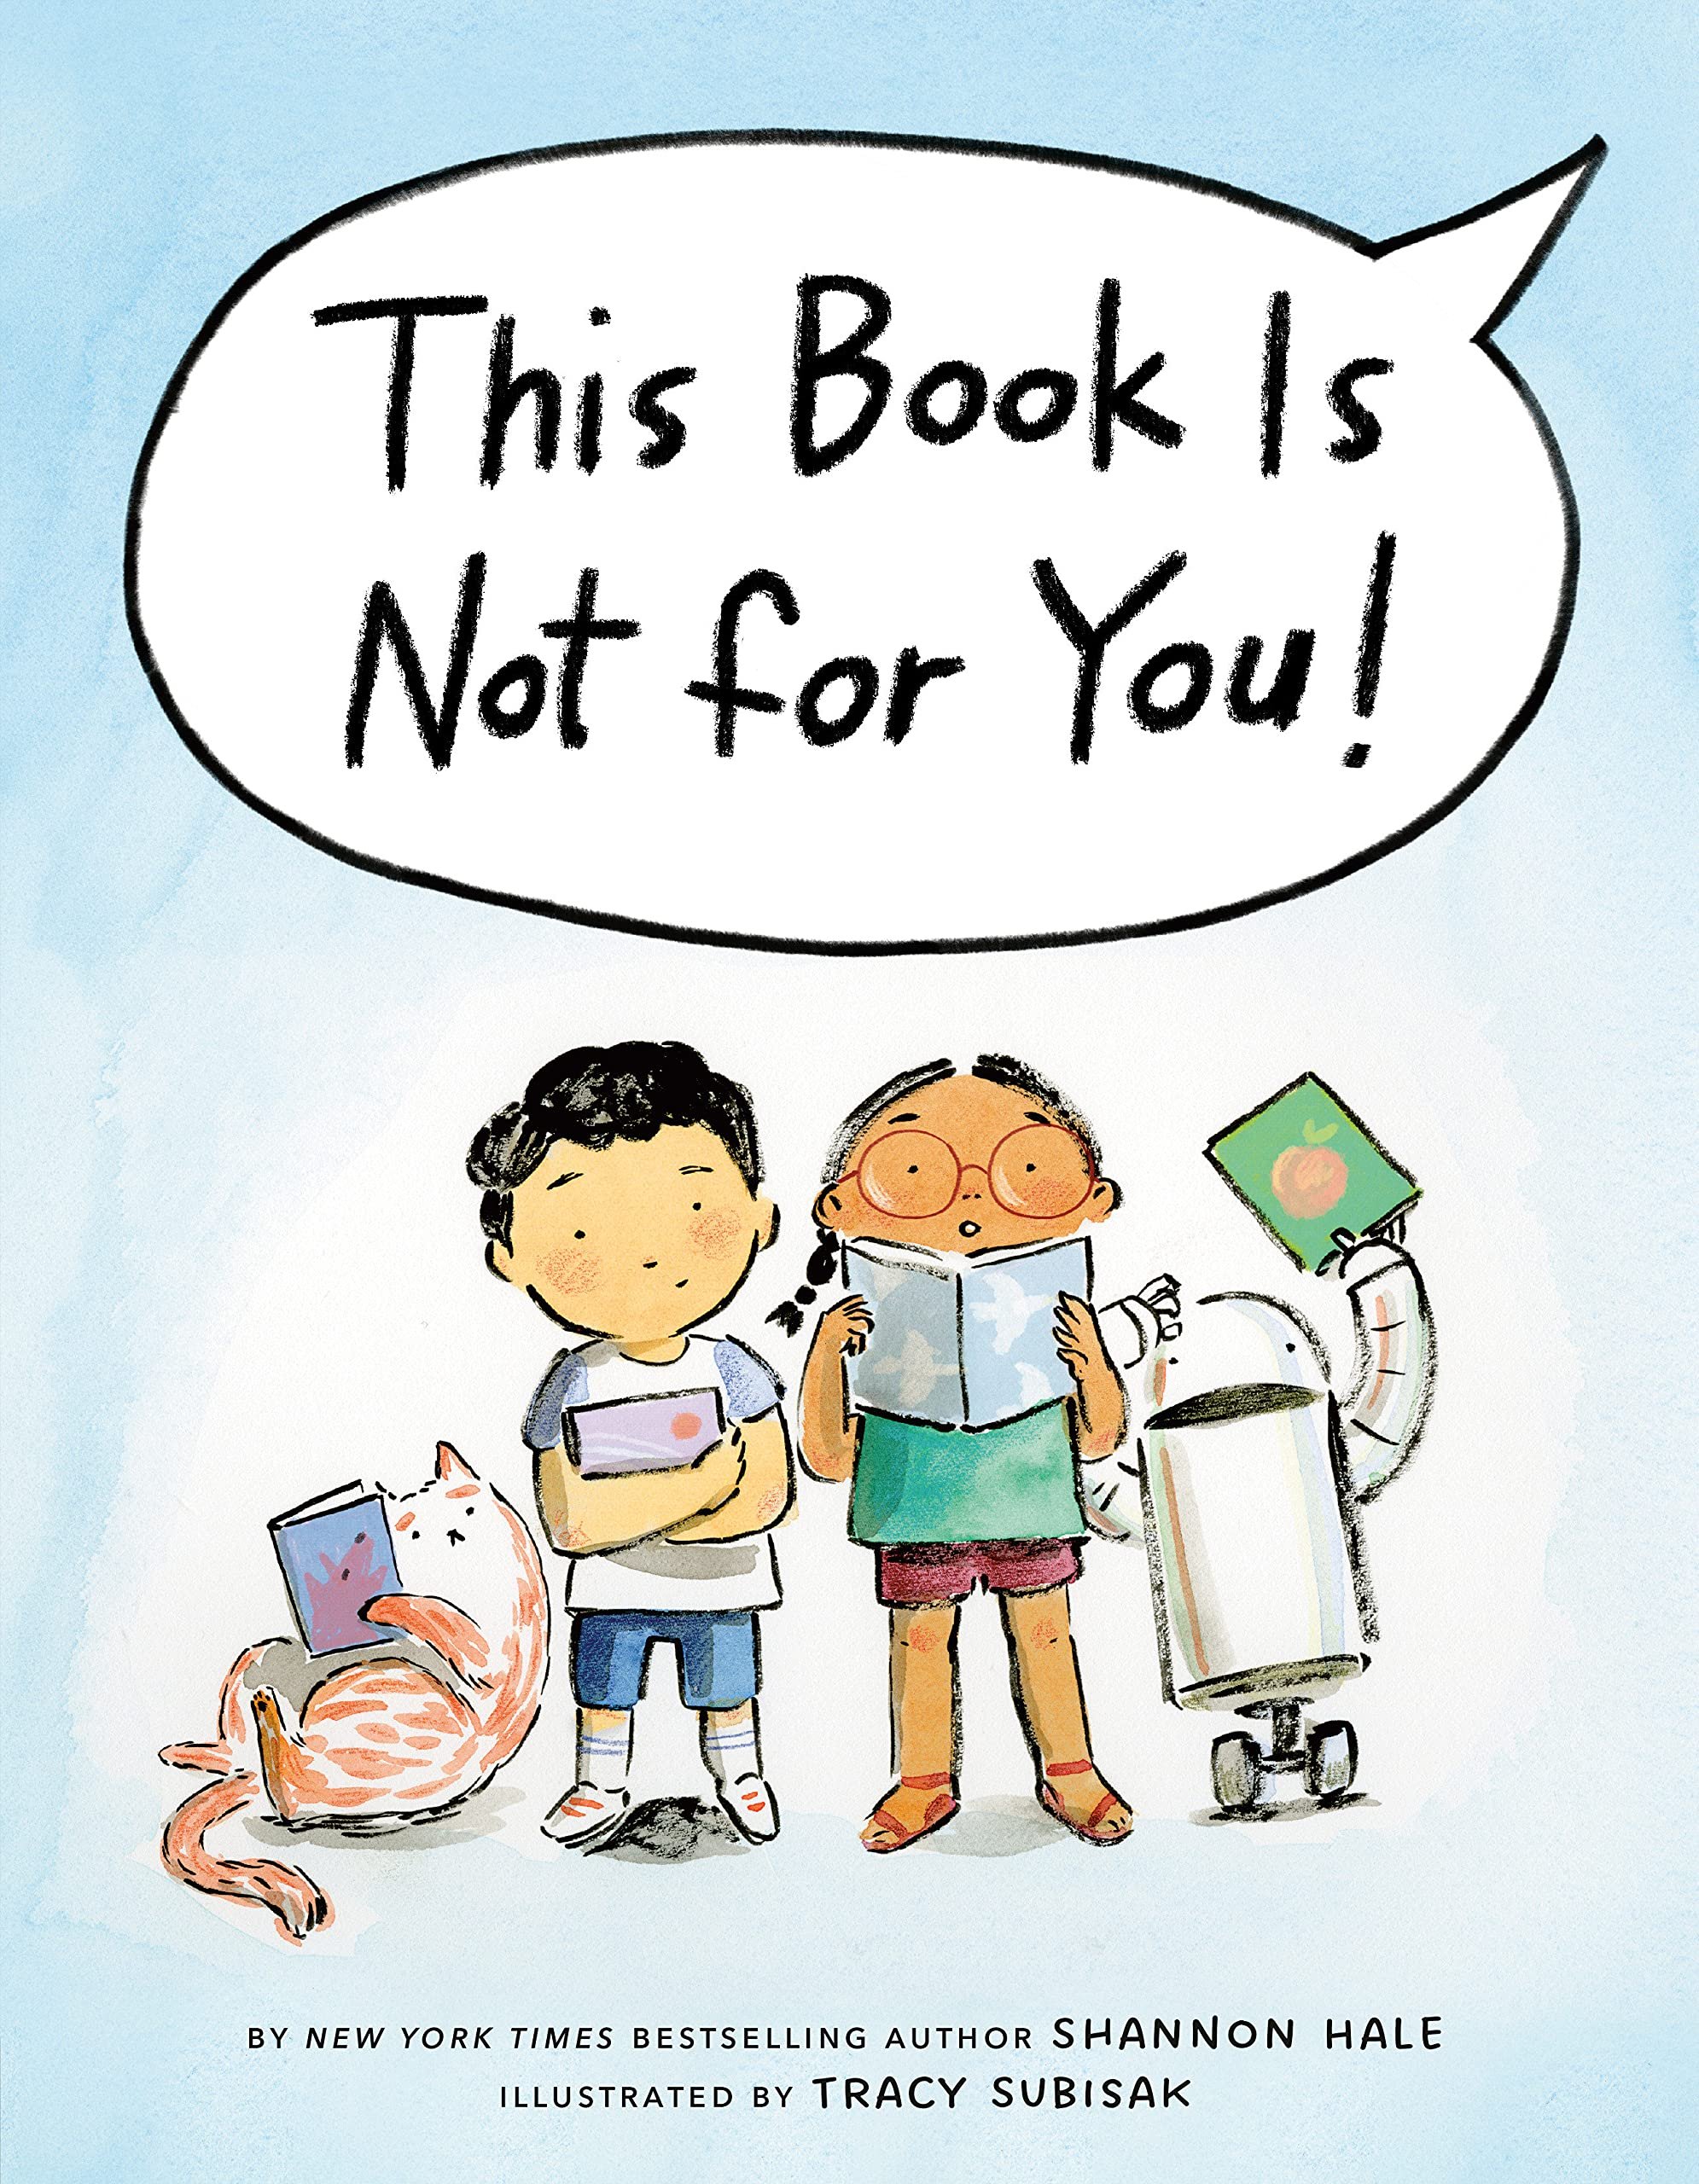 Subisak, Tracy 2022_03 THIS BOOKS IS NOT FOR YOU - PB - LK.jpg